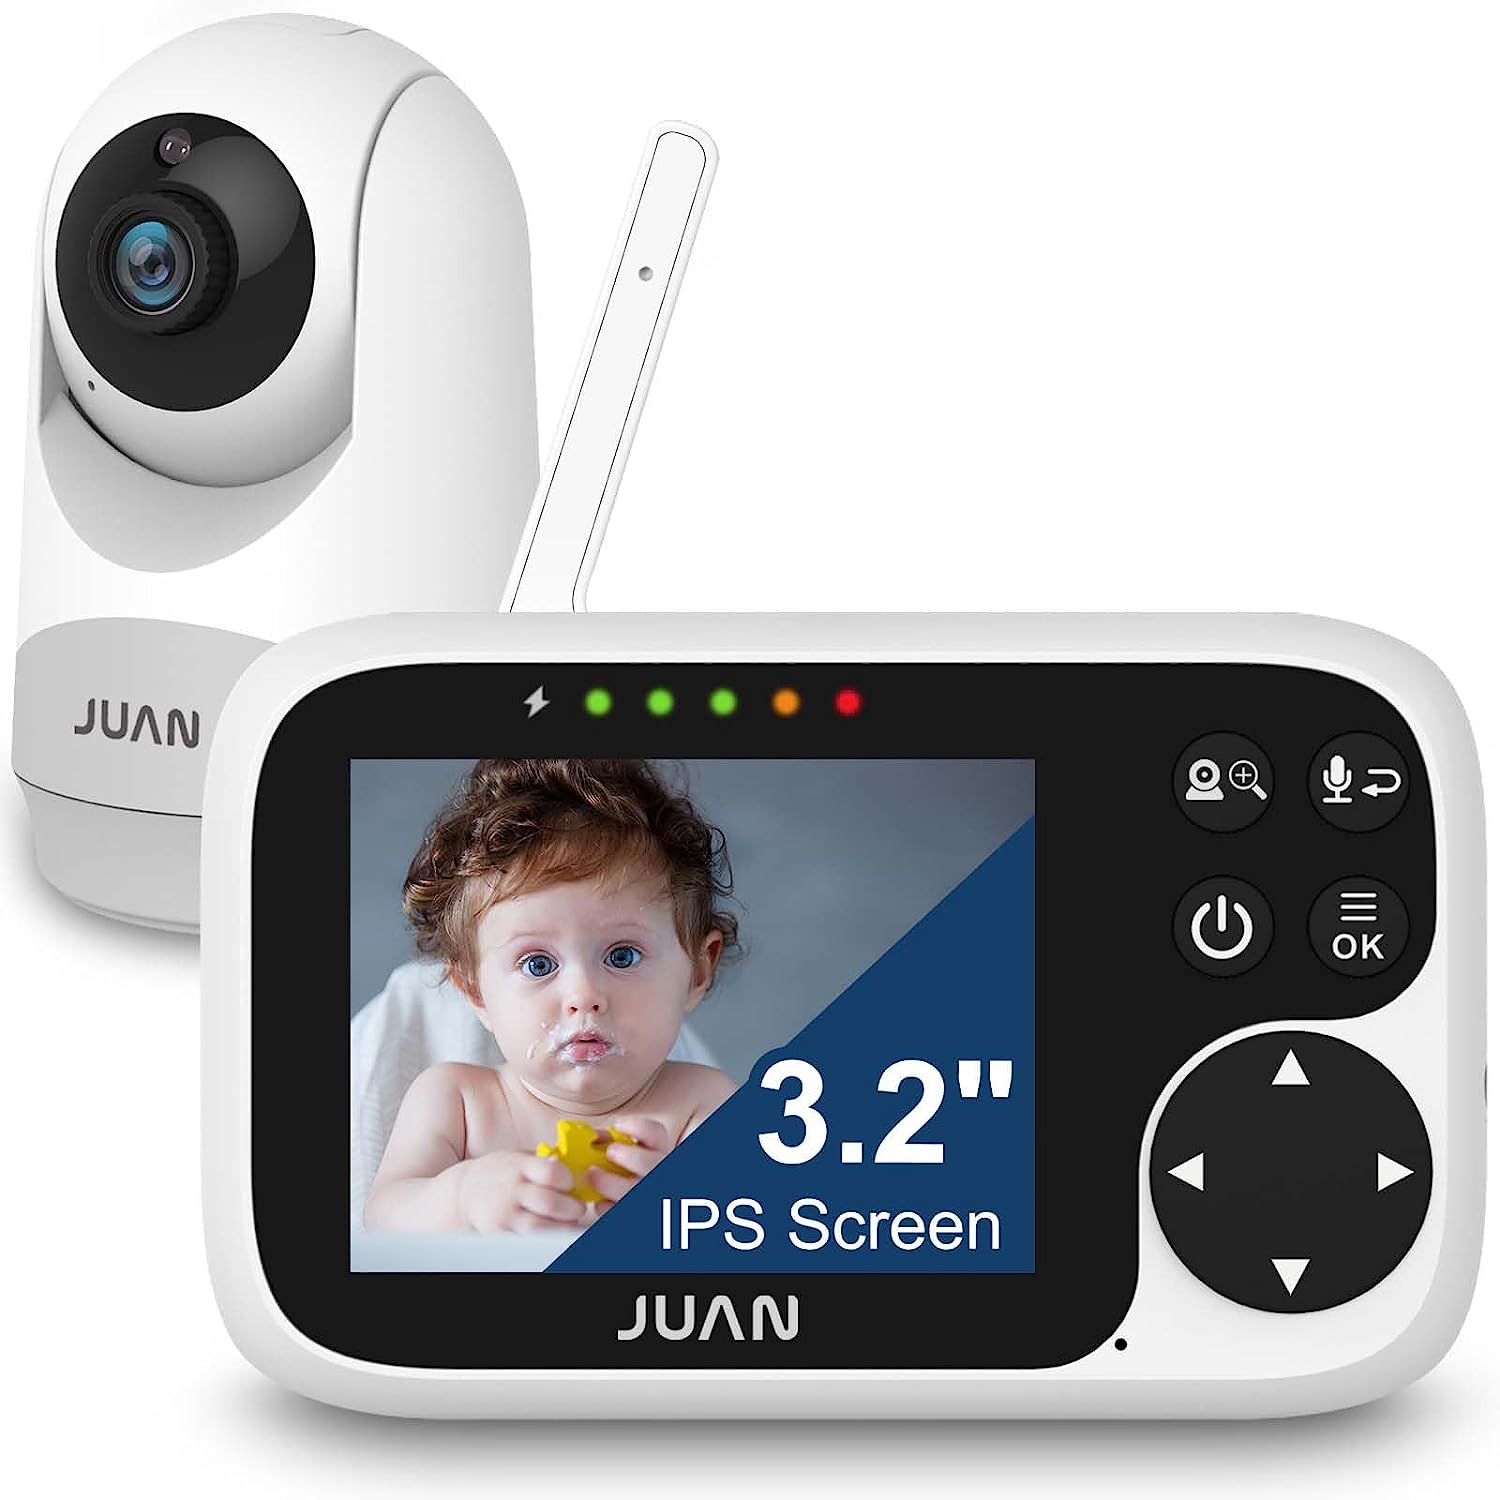 JUAN Video Baby Monitor with Camera and Audio - 3.2'' [...]